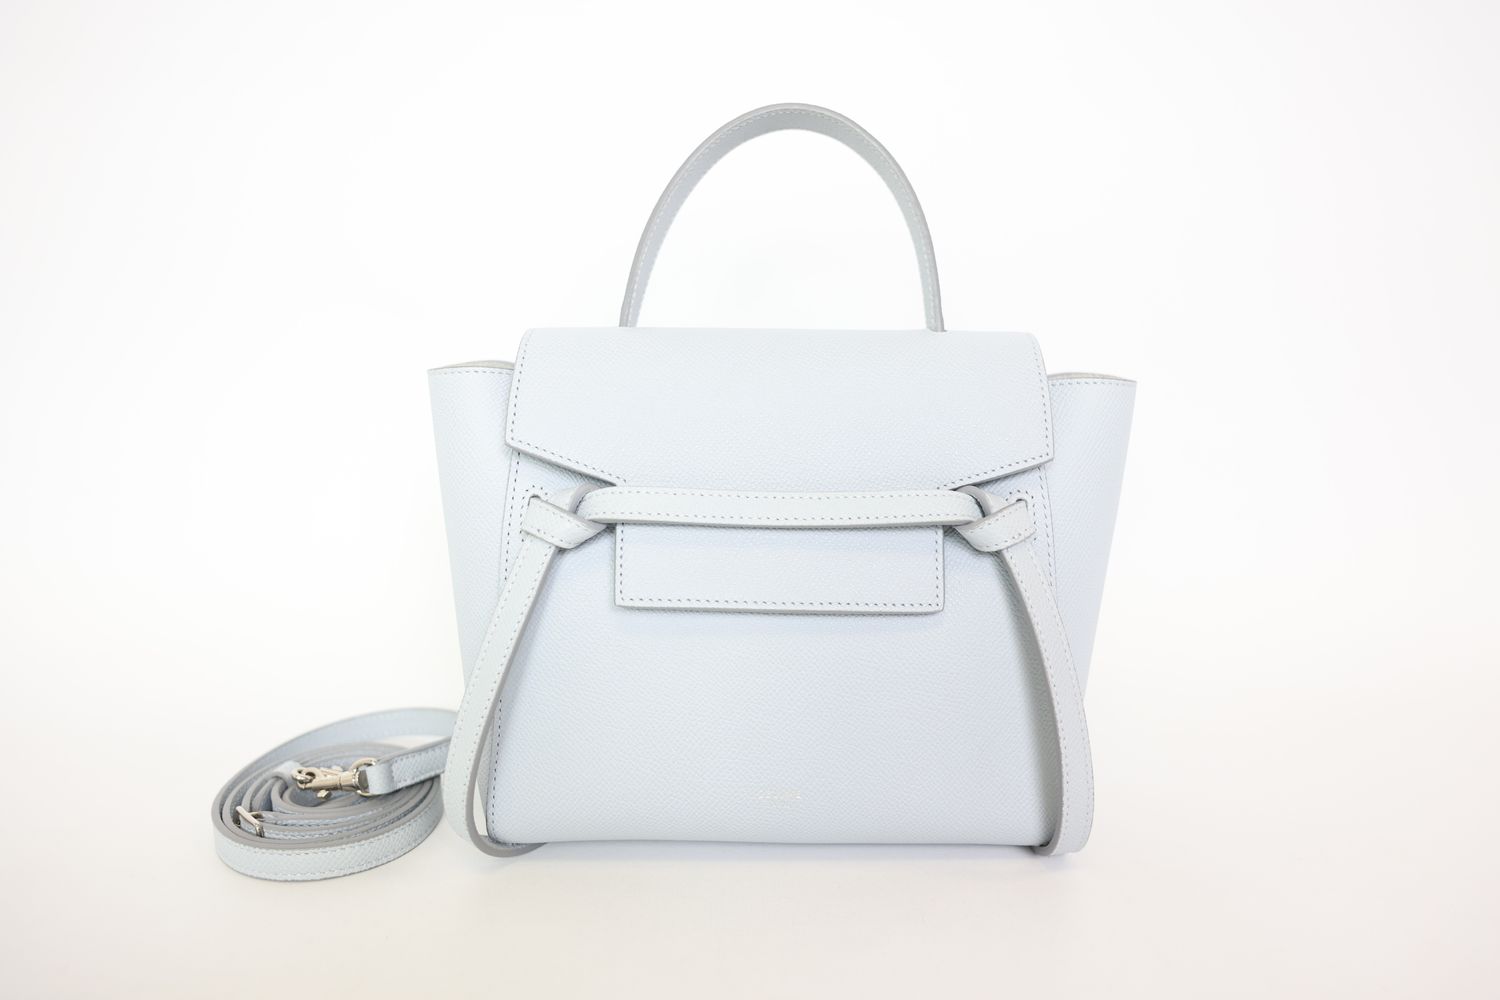 Celine Belt Bag Mini, Blue Calfskin Leather With Silver Hardware, Preowned In Dustbag WA001